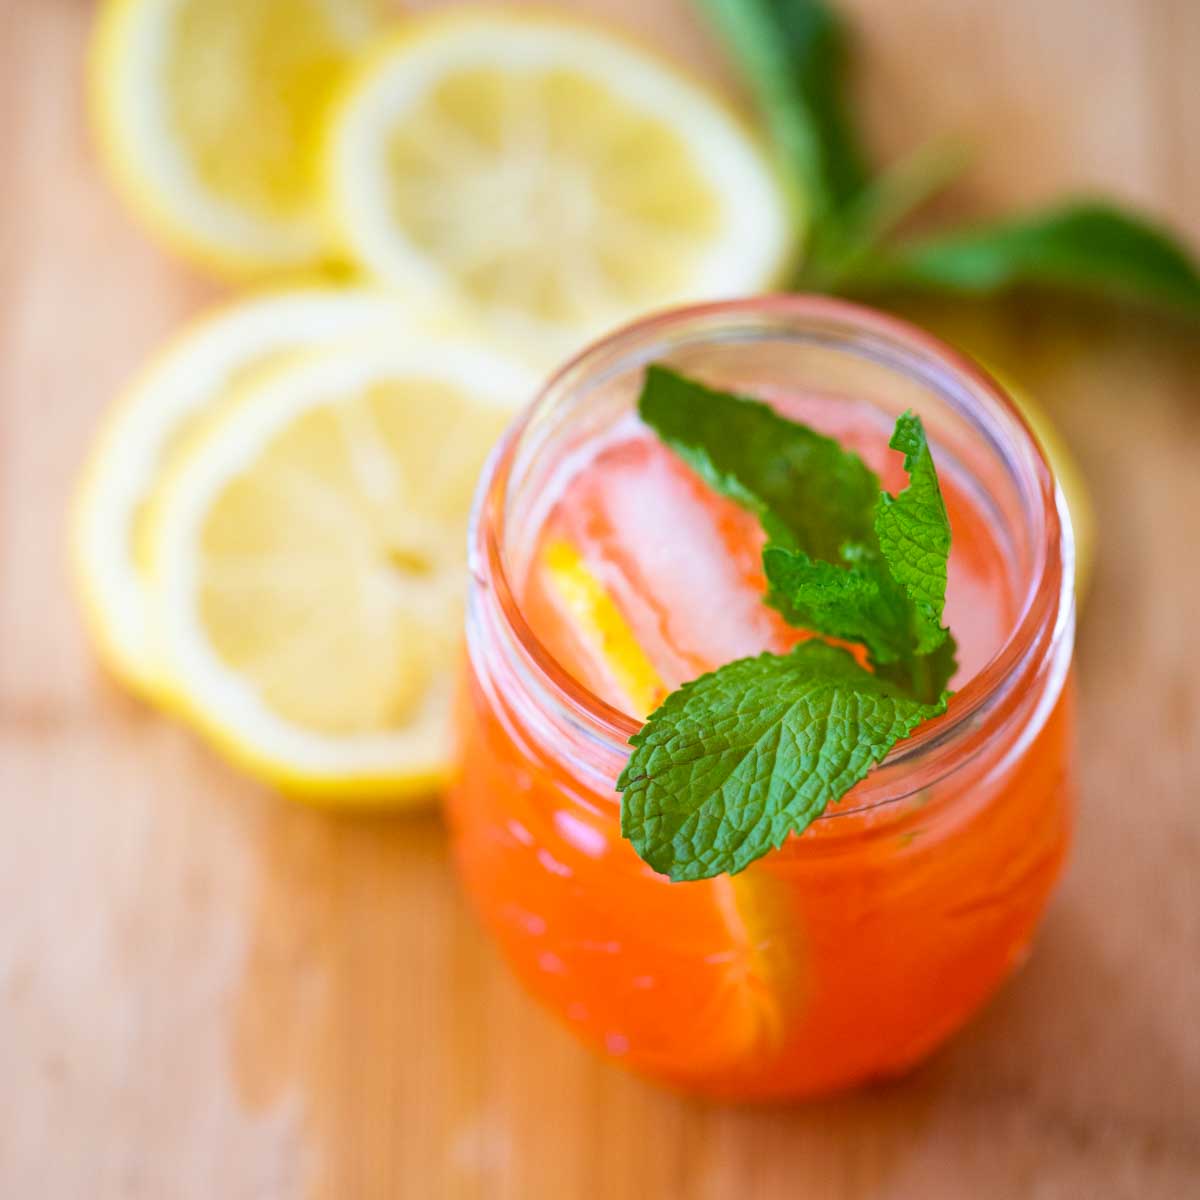 A glass of strawberry lemonade has a fresh sprig of mint on the top for garnish and sits next to several slices of fresh lemon.